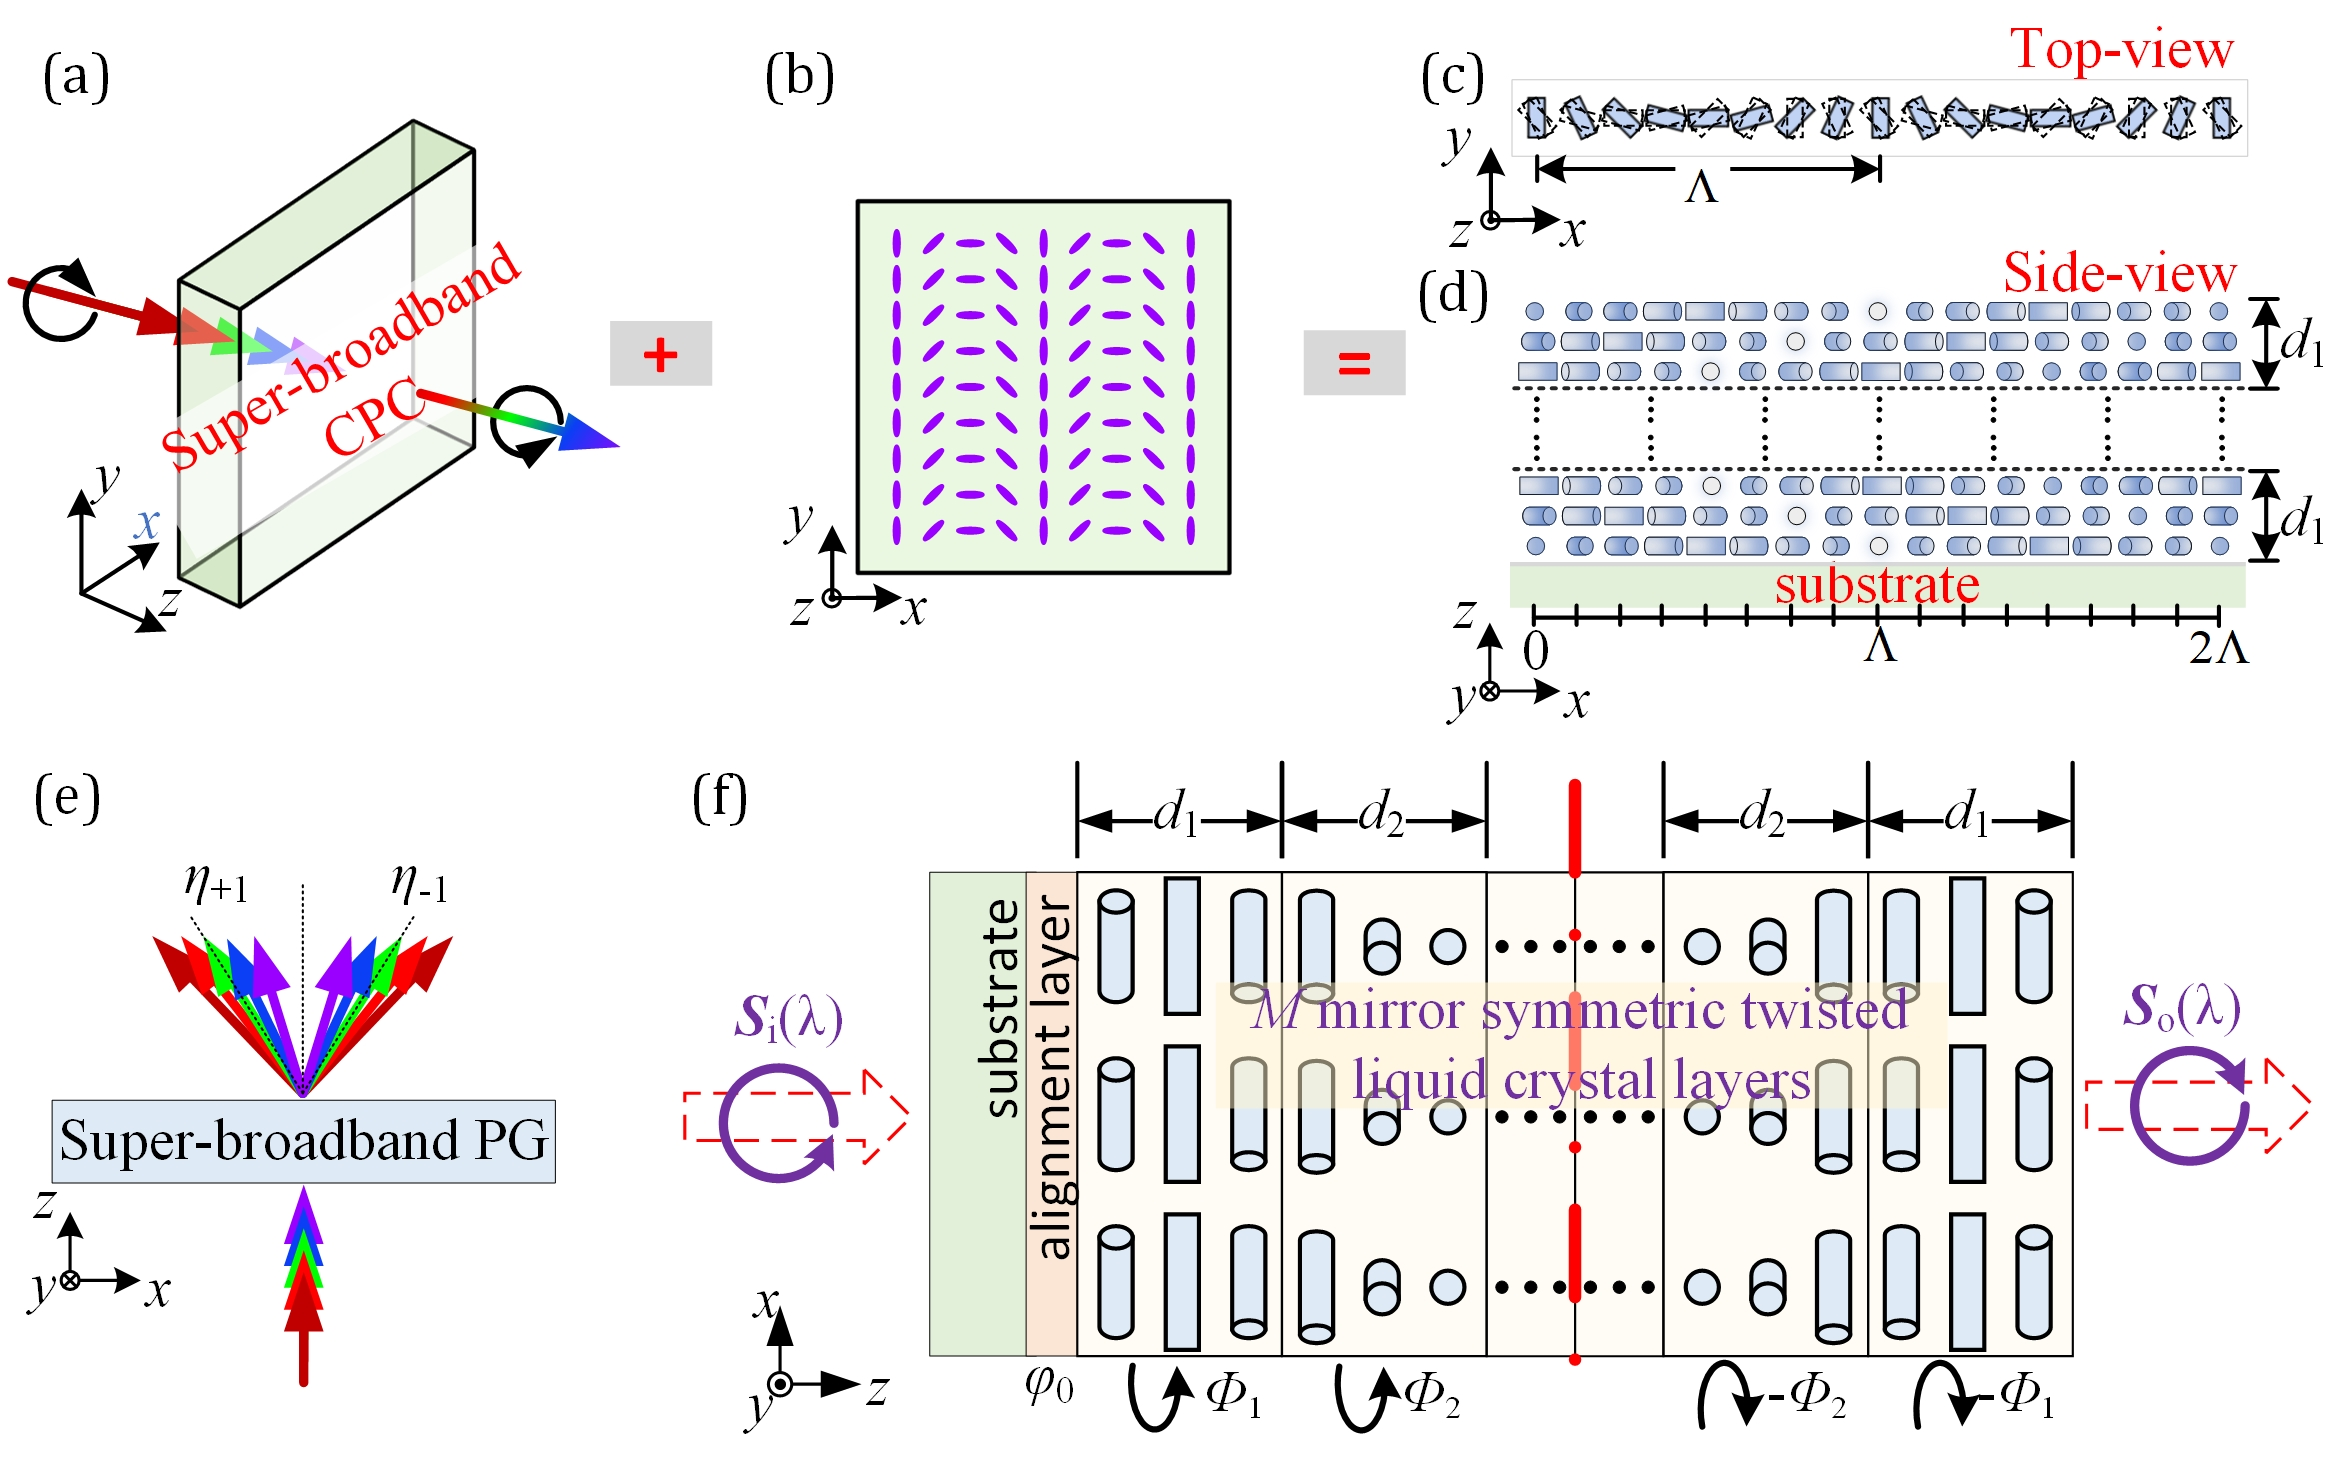 Researchers propose unit optimization method for super-broadband geometric phase devices